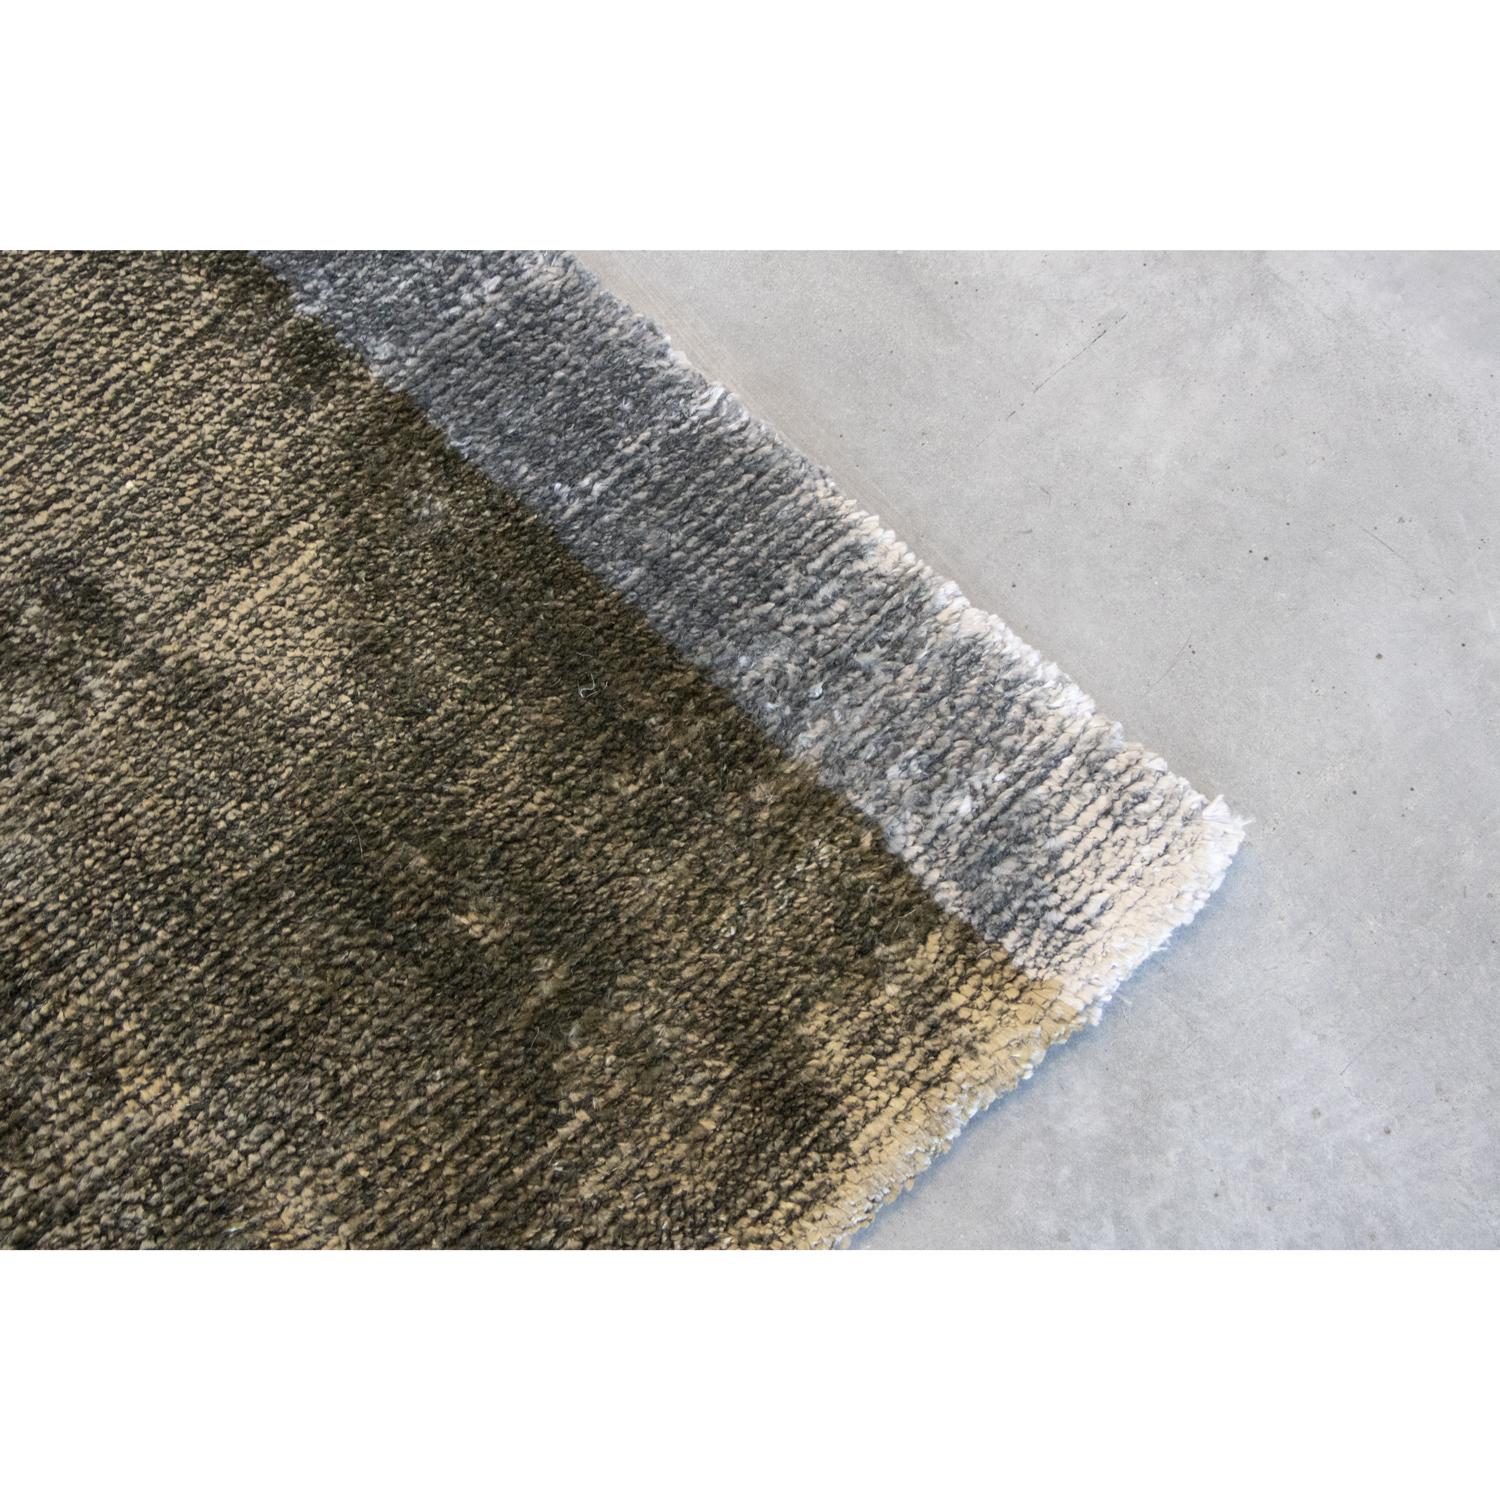 Indian 21st Century Shiny Velvety Green Rug by Deanna Comellini in Stock 200x300 cm For Sale